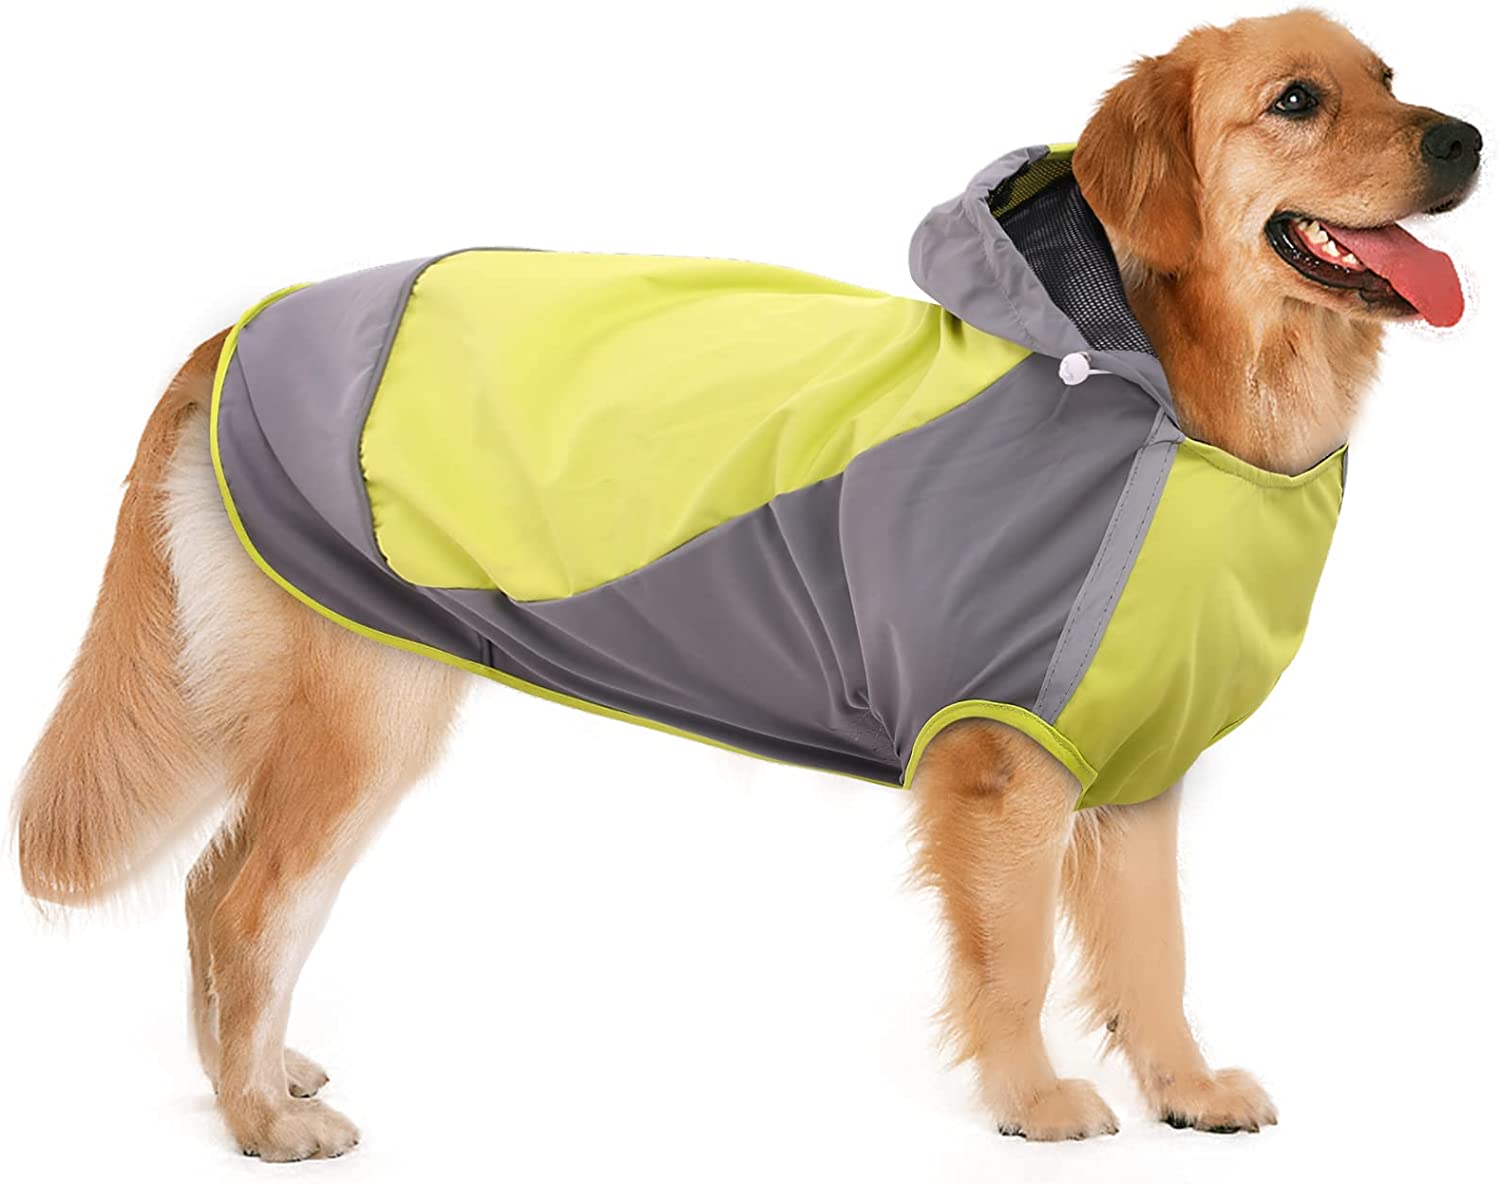 Kuoser Dog Raincoat, Dog Hooded Rain Jacket, Breathable & Reflective Puppy Slicker Poncho, Doggies Rain Coat Water Proof Pet Clothes with Harness Hole for Small Medium Large Dogs